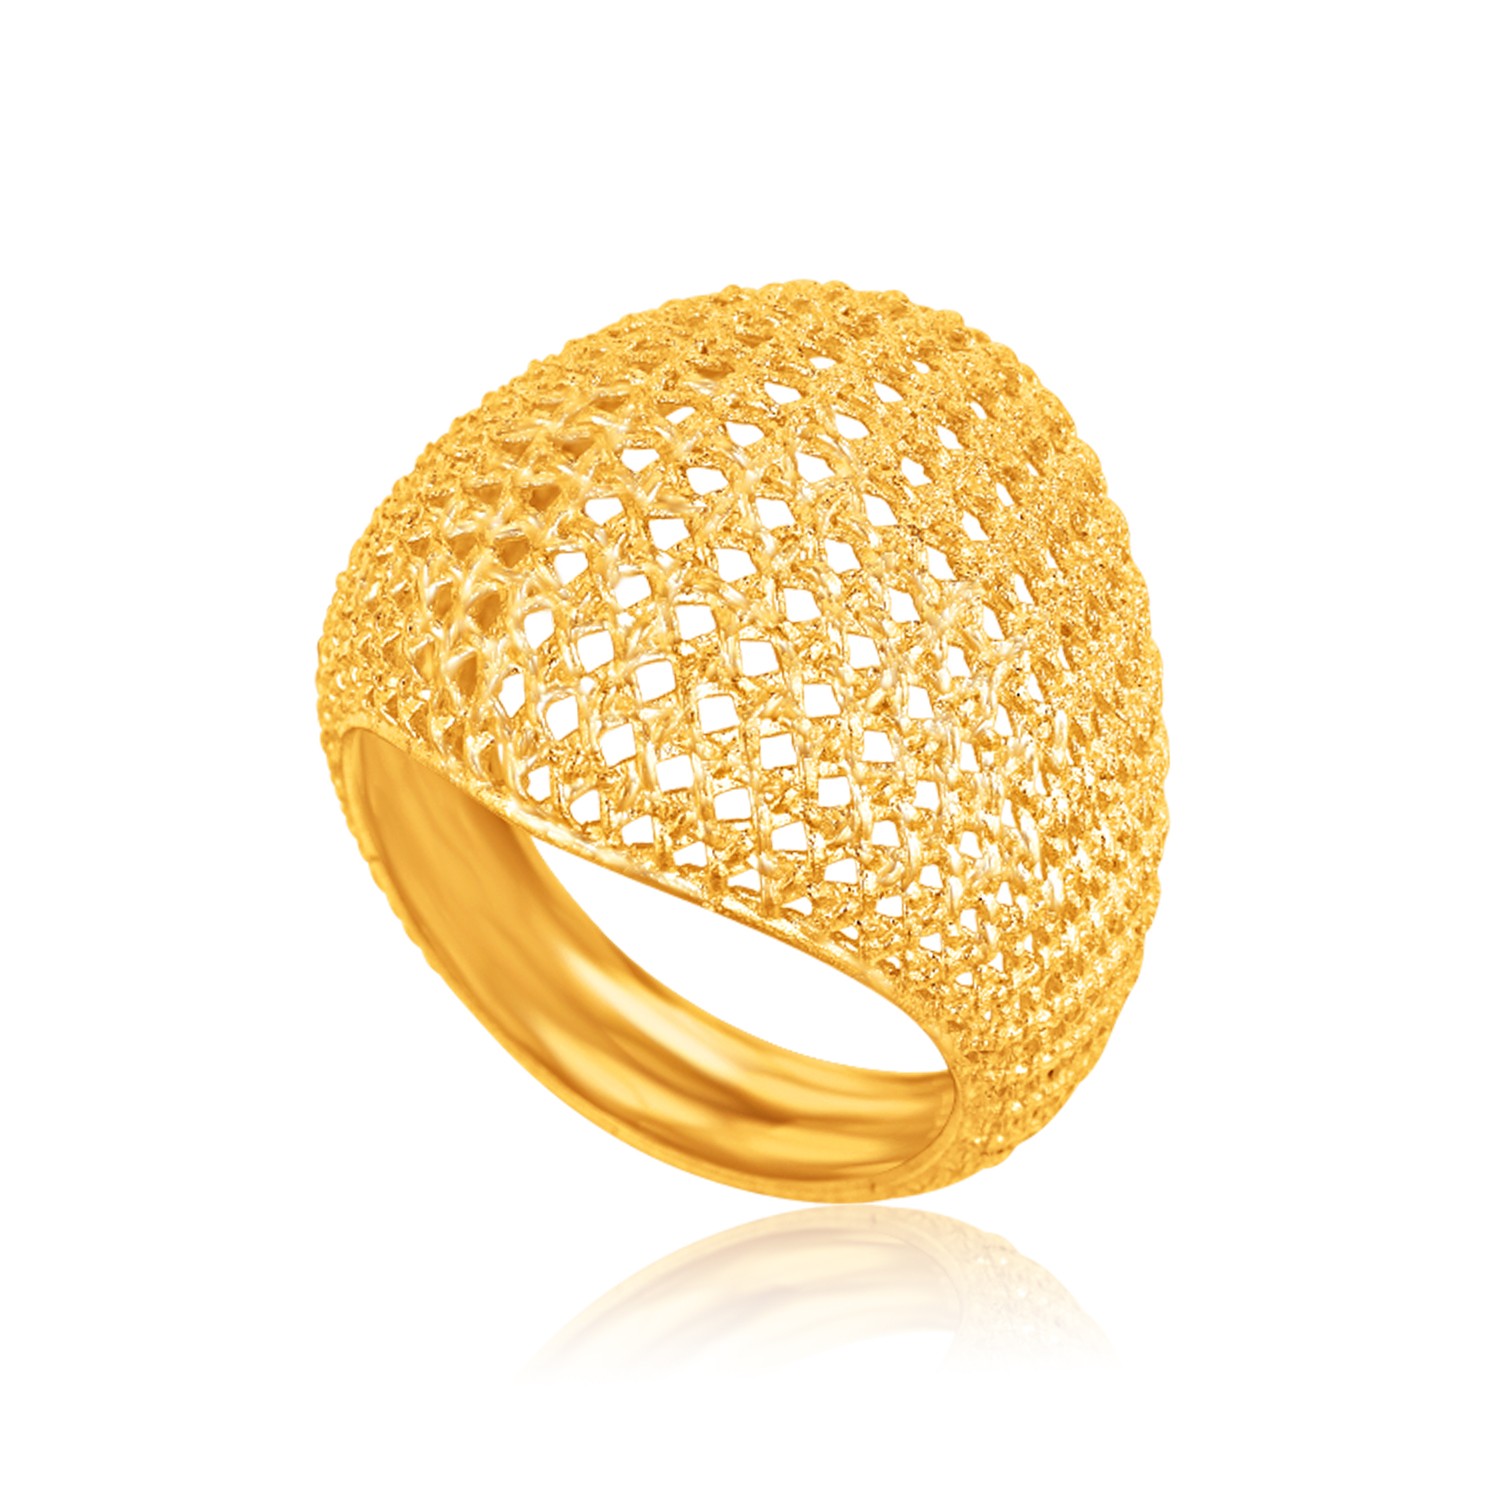 Dome Crochet Ring in 14K Yellow Gold - Richard Cannon Jewelry